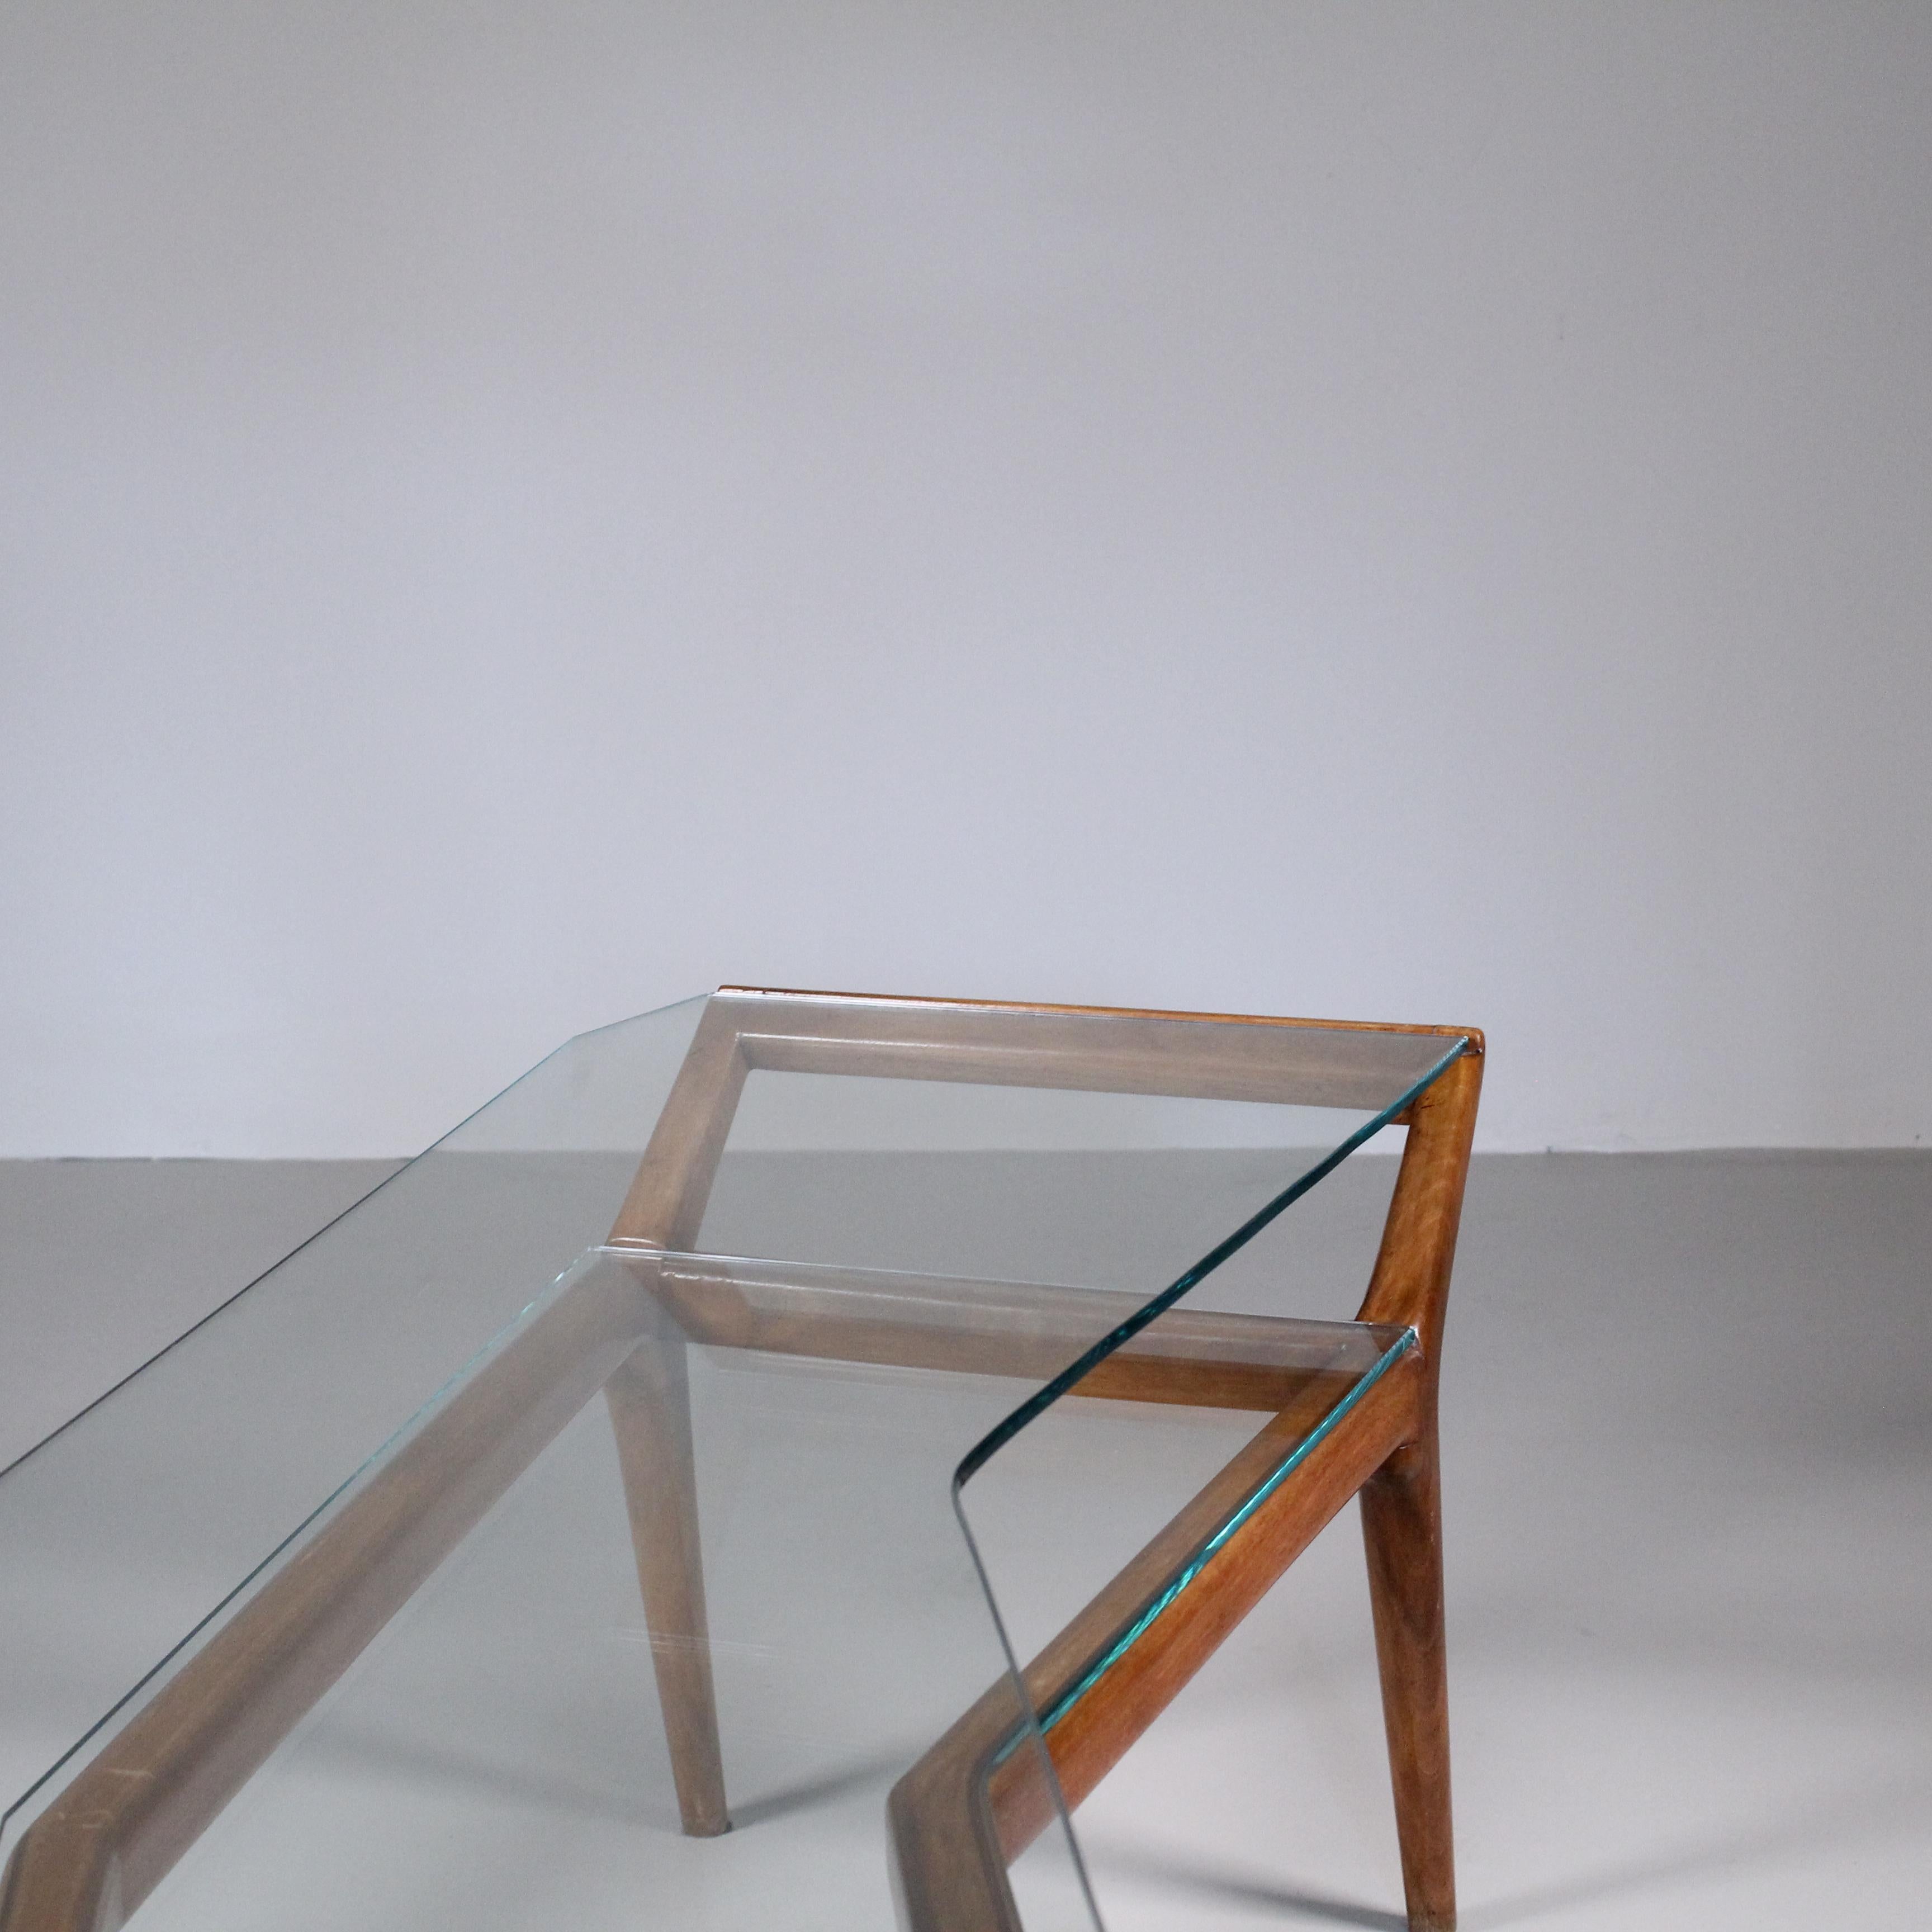 A coffee table with an asymmetrical design in wood and glass, with a mid-century-inspired style, for which we cannot find an attribution unfortunately. But the quality is so high and the object from life is so incredible that we find it hard to